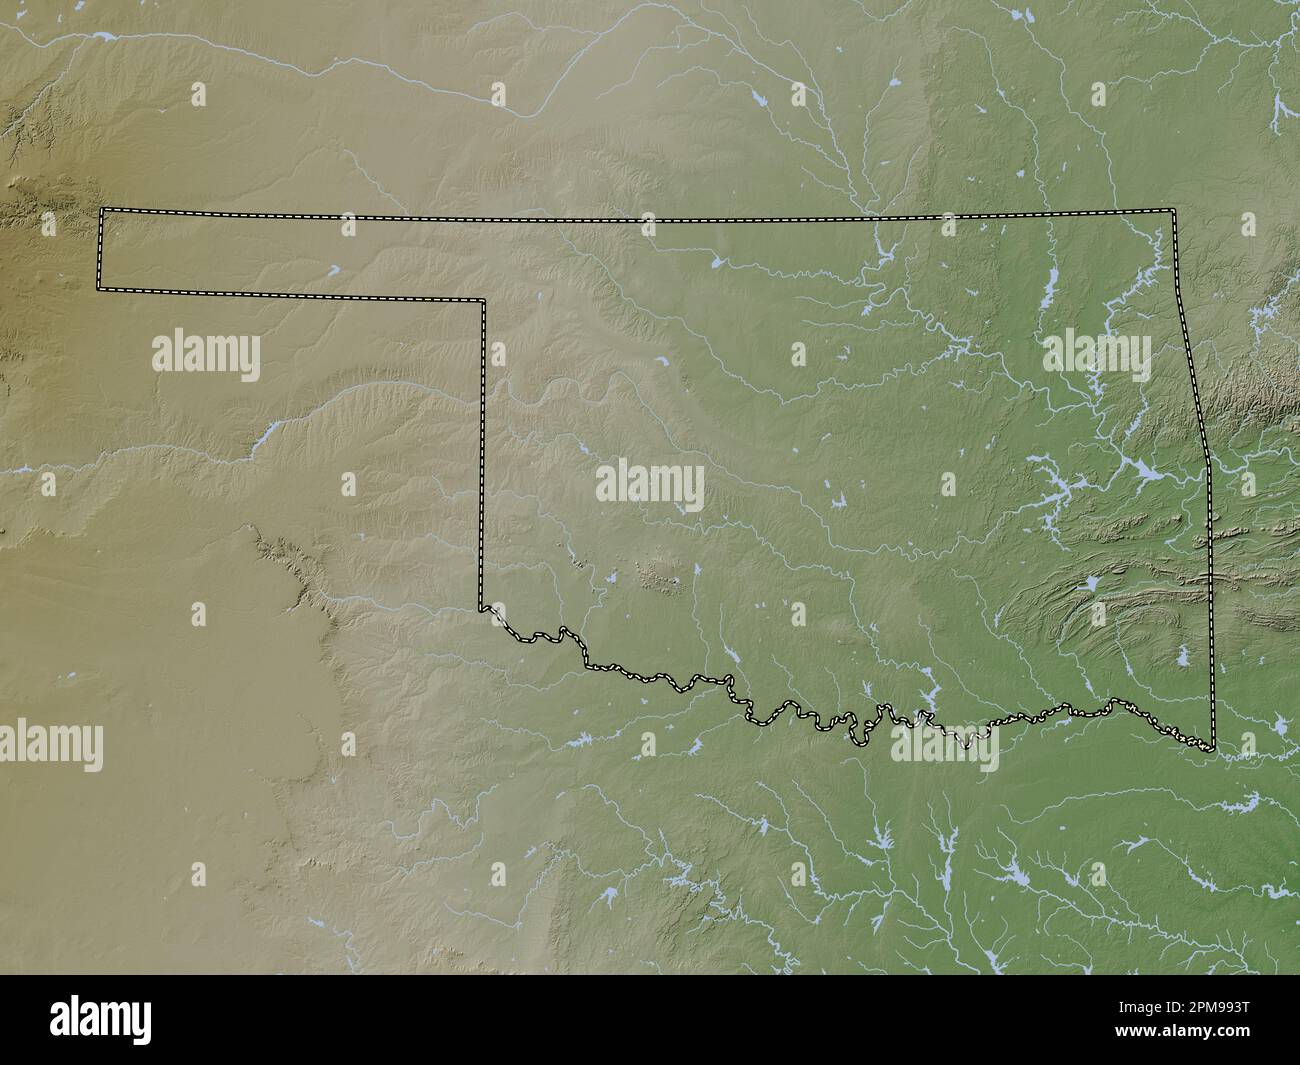 Oklahoma, state of United States of America. Elevation map colored in wiki style with lakes and rivers Stock Photo